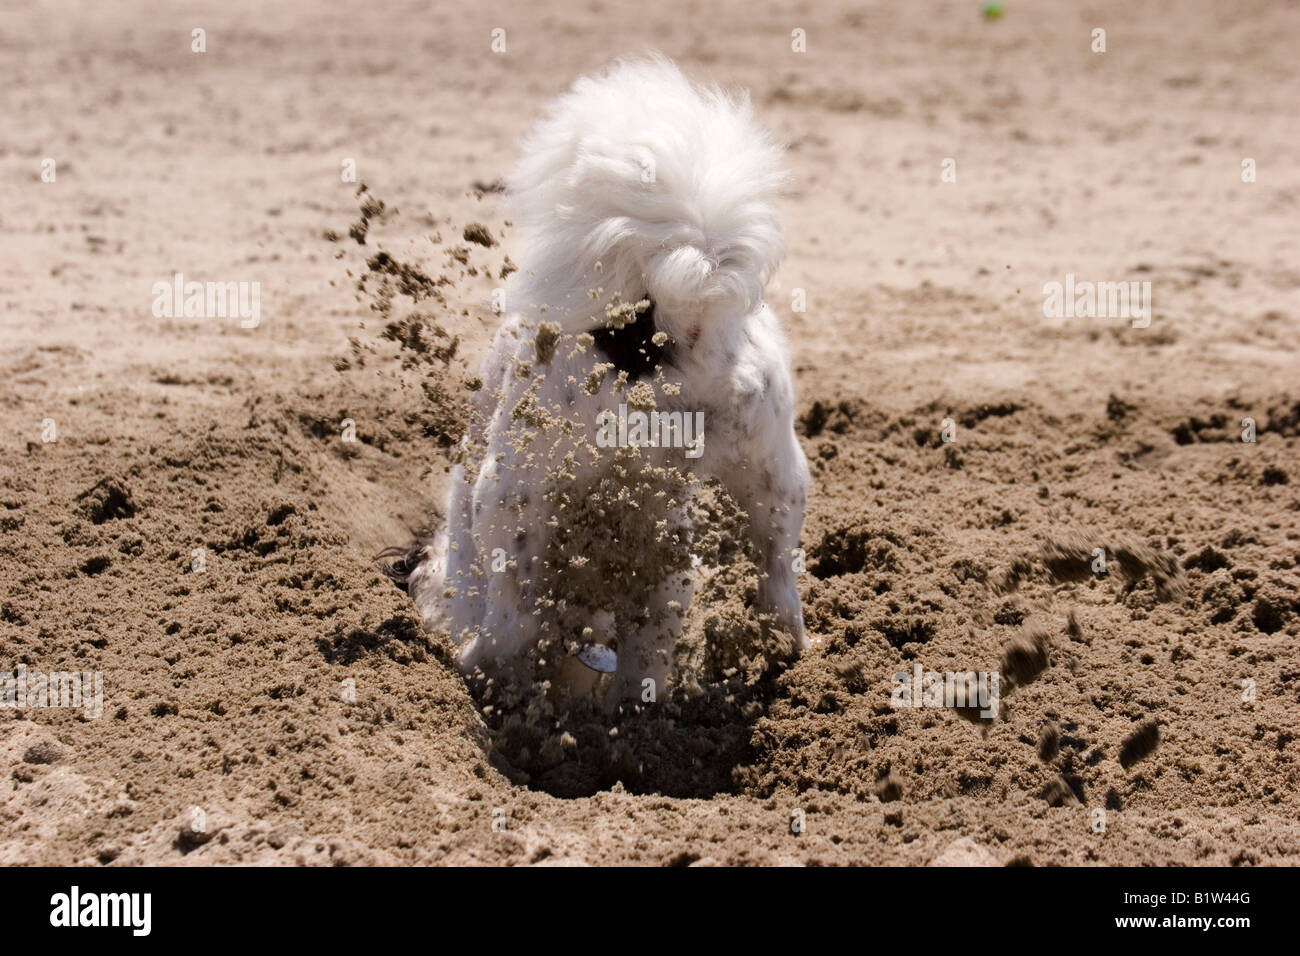 Humorous photo of a small white dog enthusiastically digging a  hole in the sand. Stock Photo